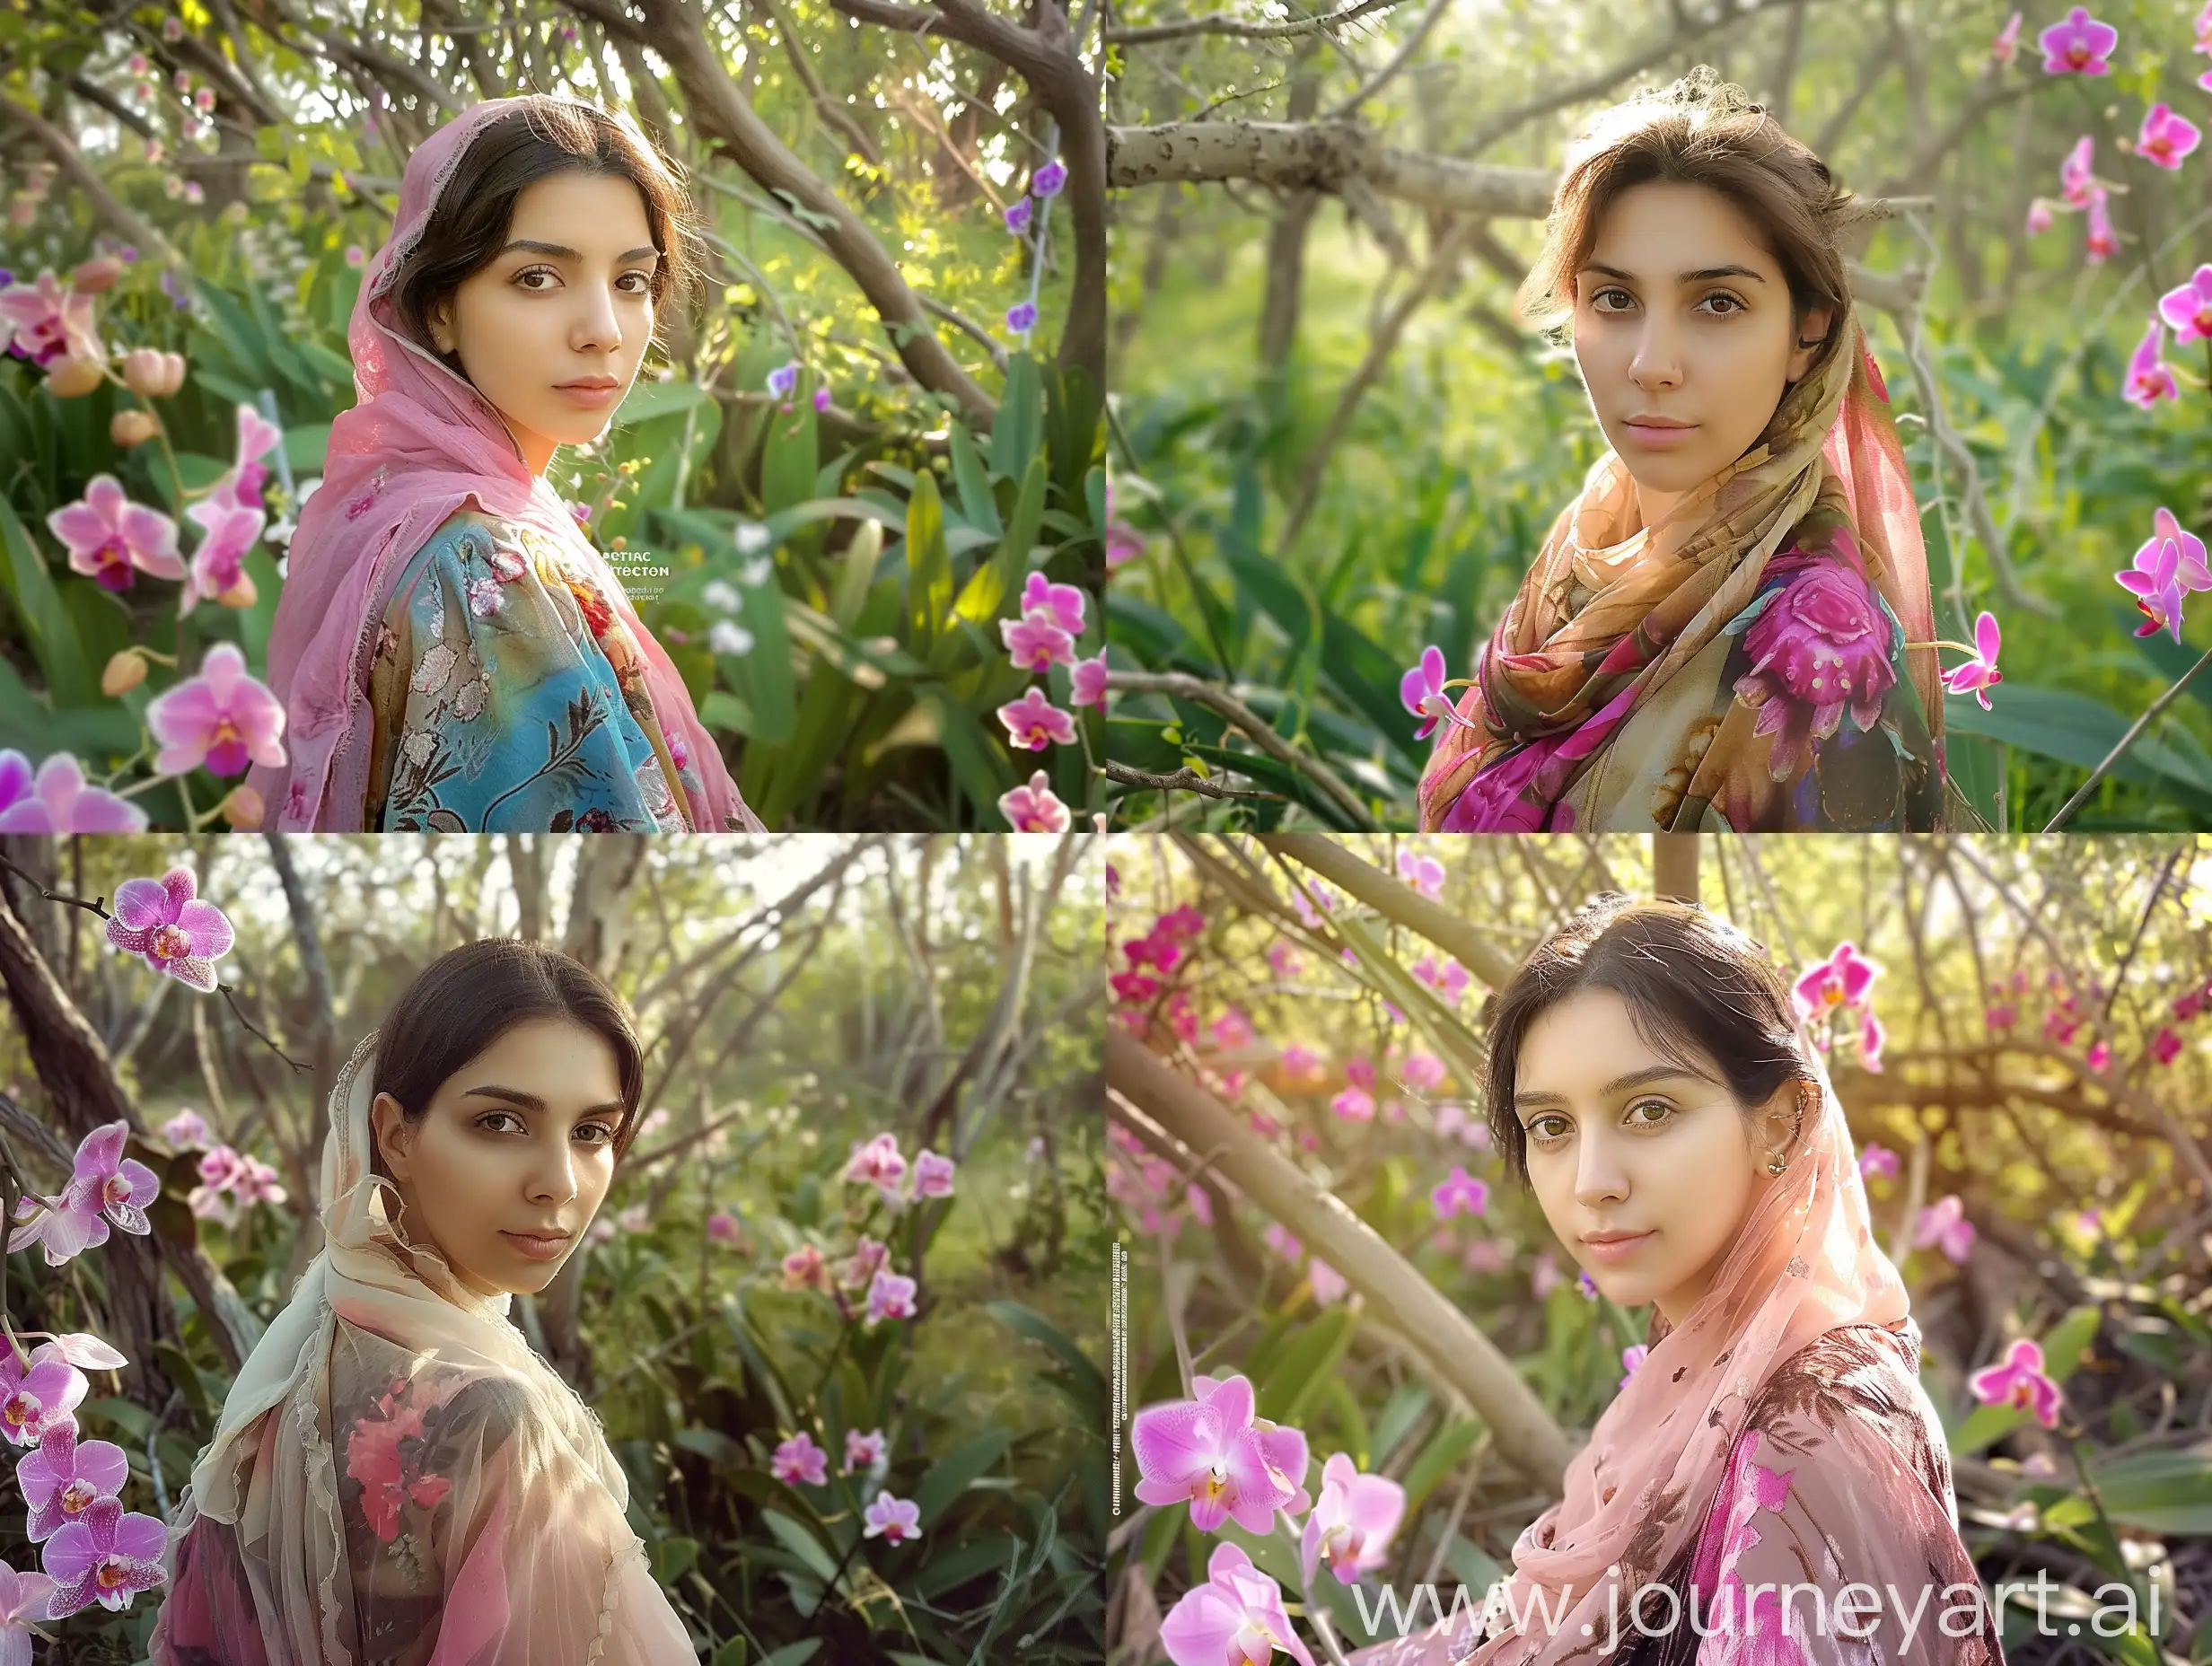 A real photo of a girl with beautiful clothes in the field of orchid flowers